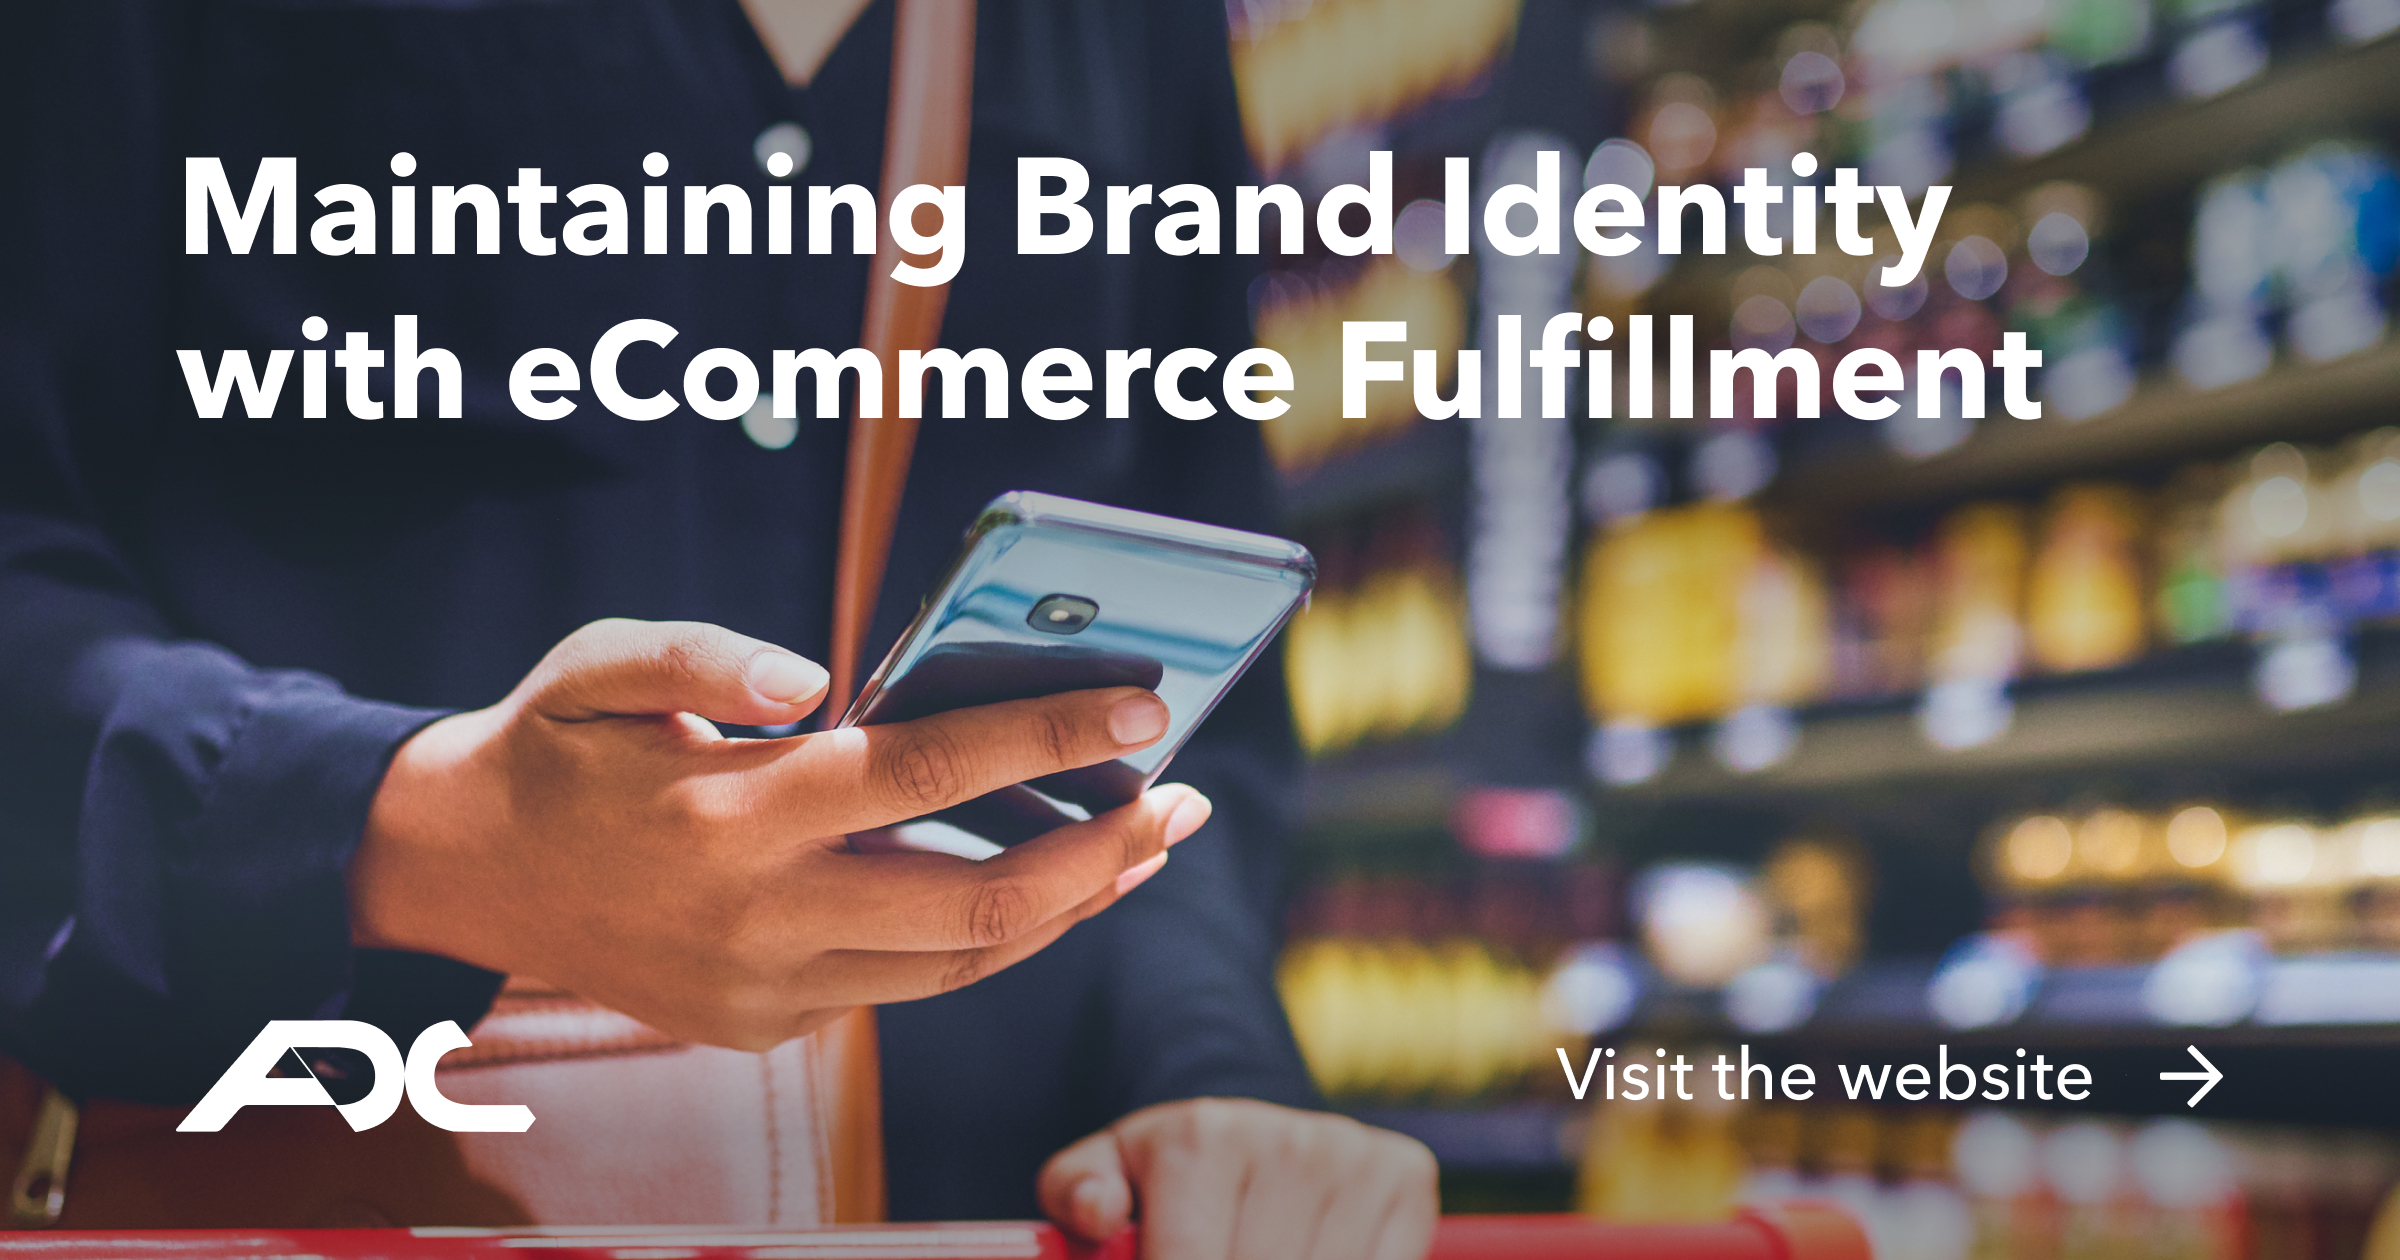 Maintaining Brand Identity with eCommerce Fulfillment